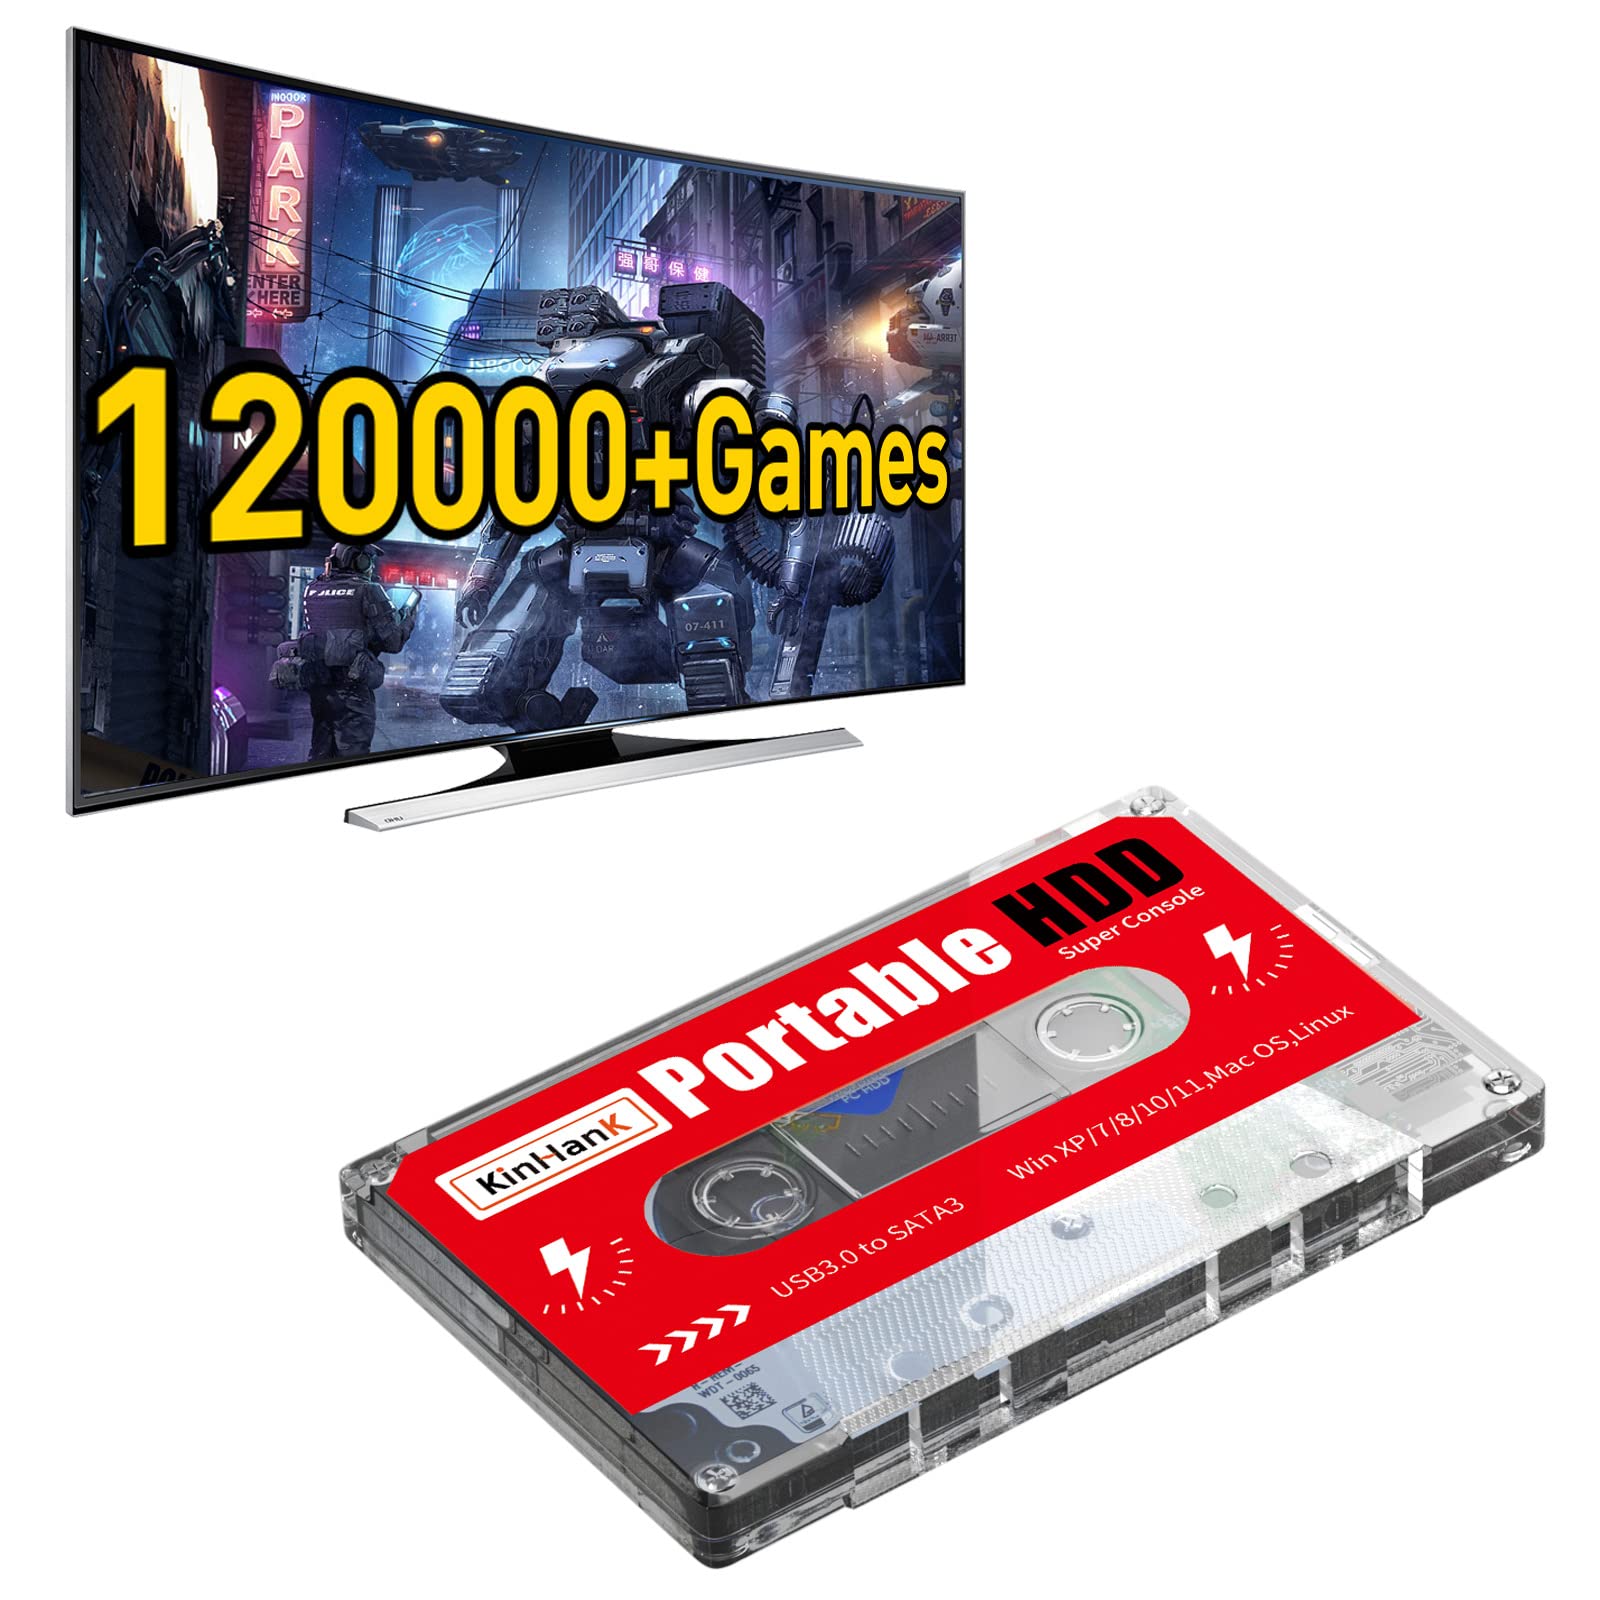 2TB Game Drive, USB 3.0, Built-in 120000+ Games, External Hard Drive Compatible with Mac OS/Linux/Windows XP/7/8/10/11, Portable HDD Compatible with Arcade/Atari/Sega/PS1/PSP etc